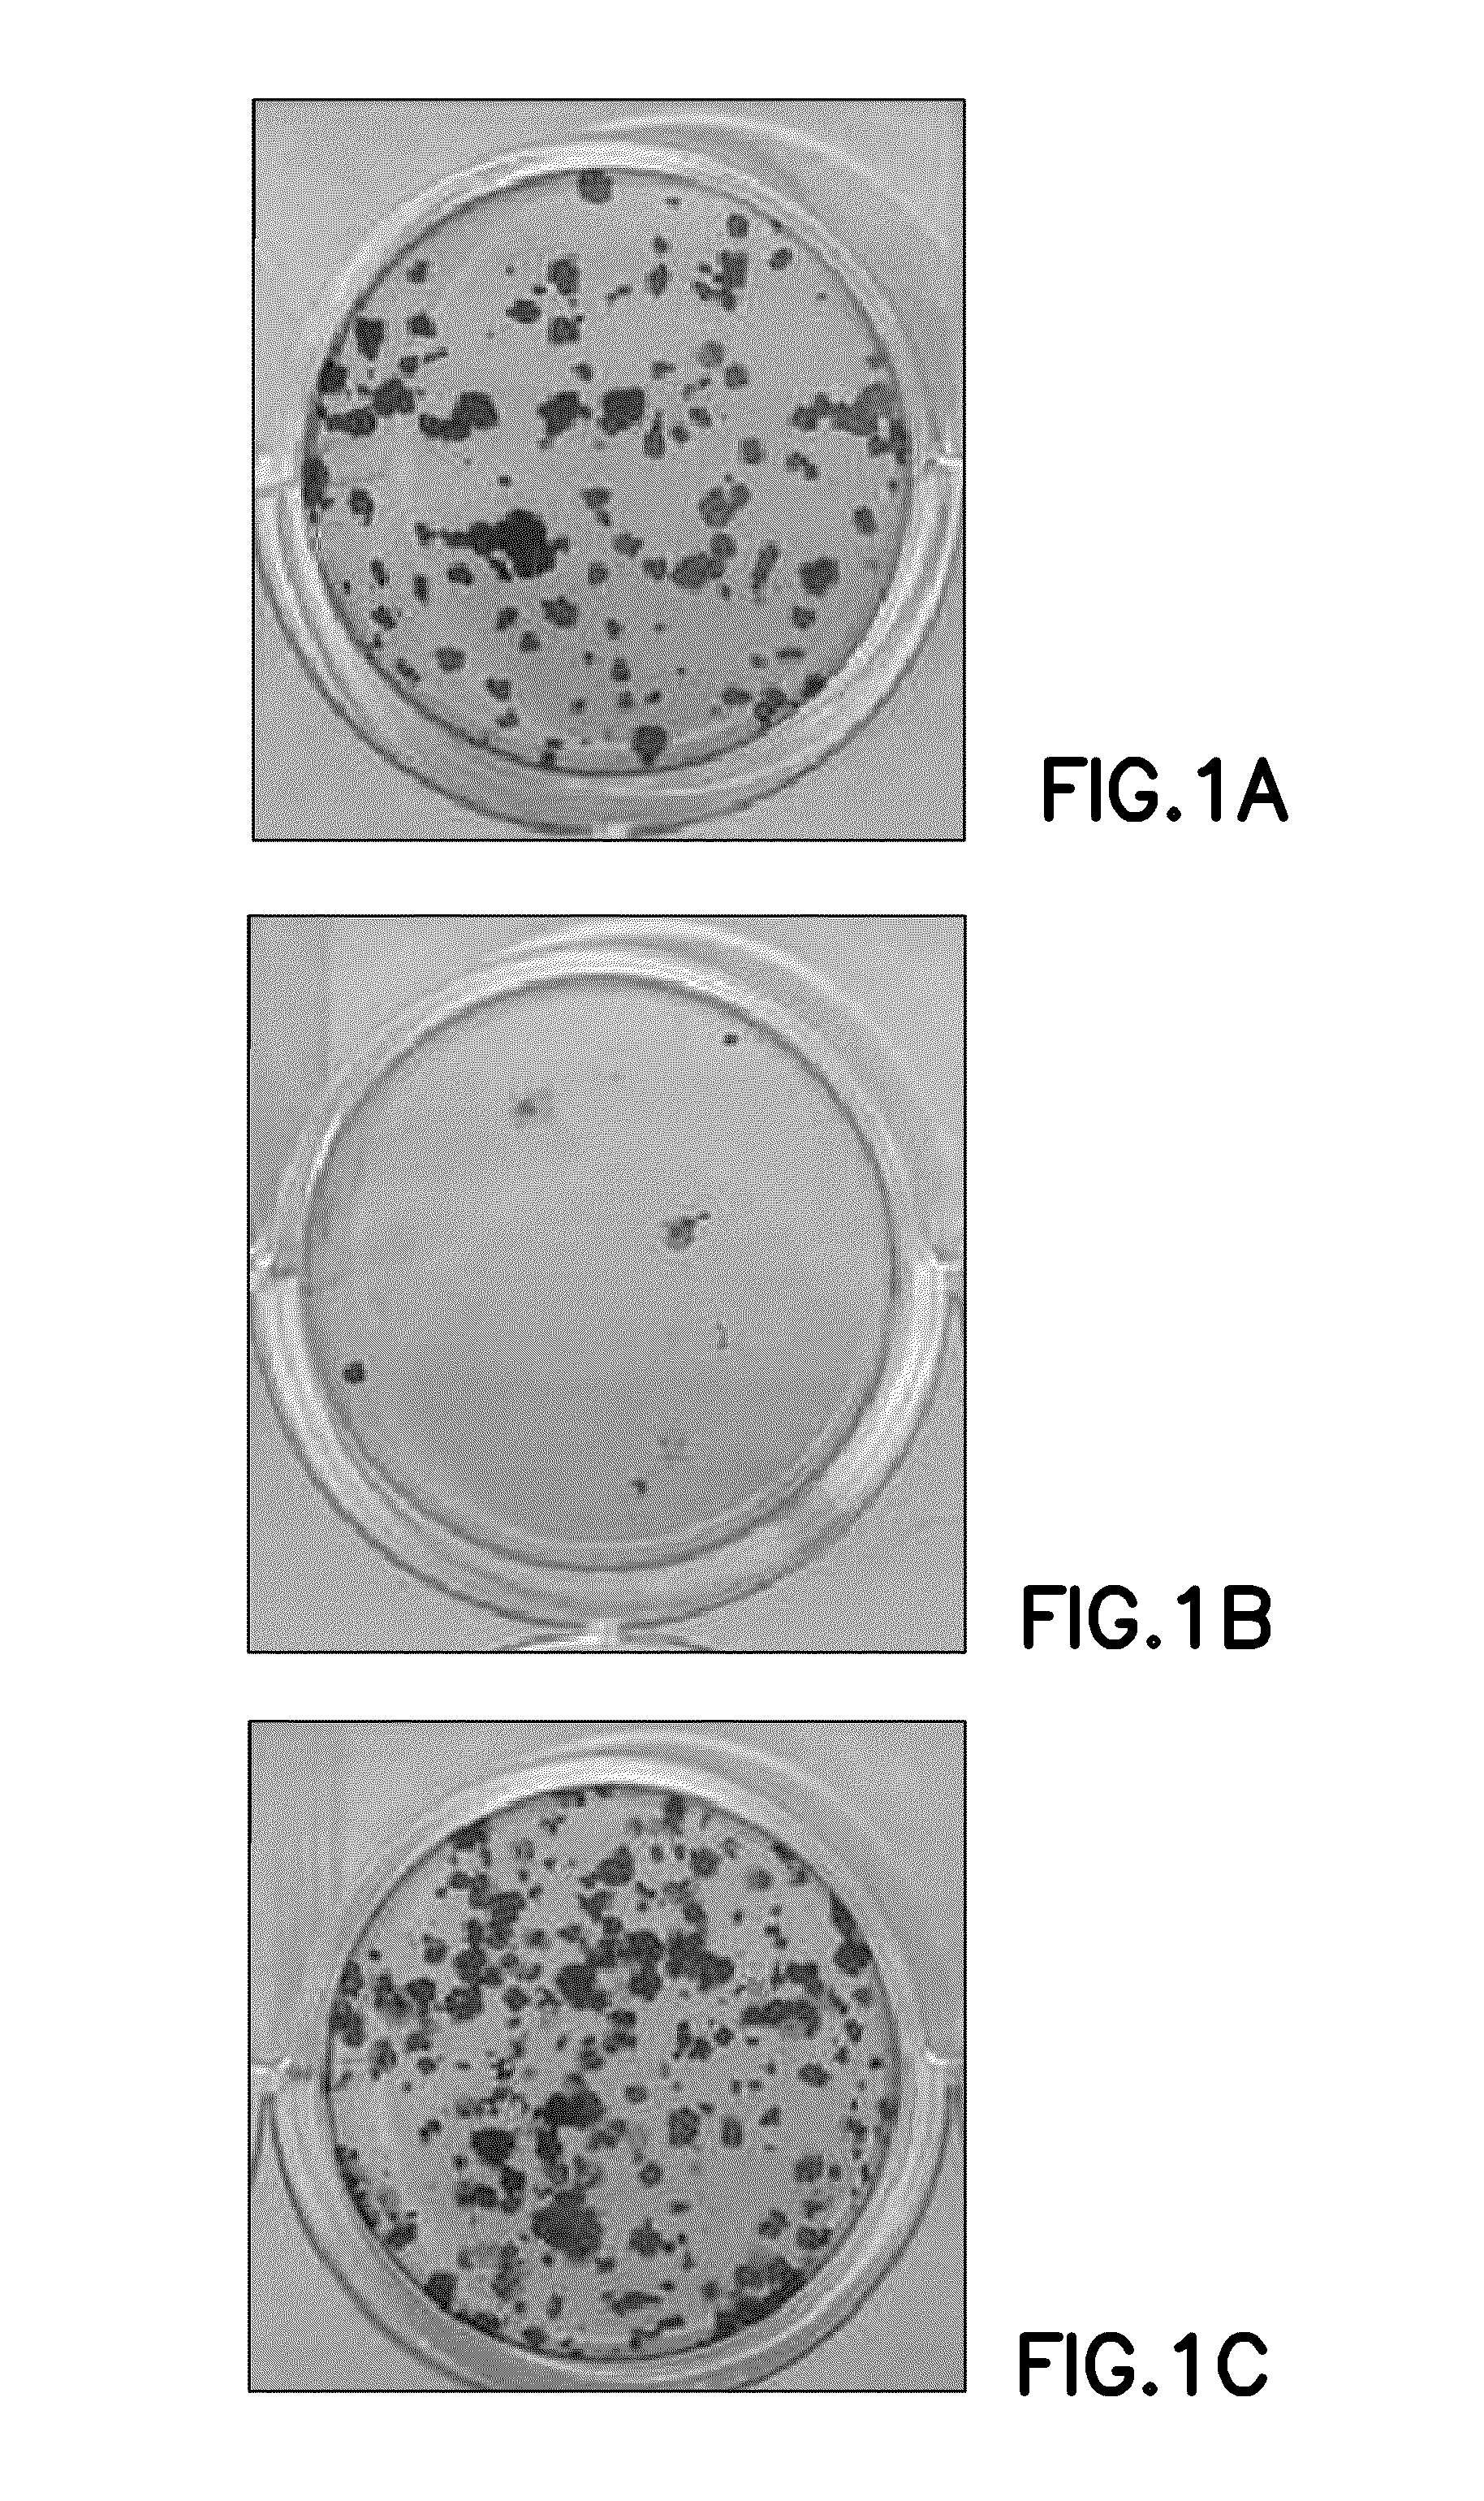 Defined cell culturing surfaces and methods of use